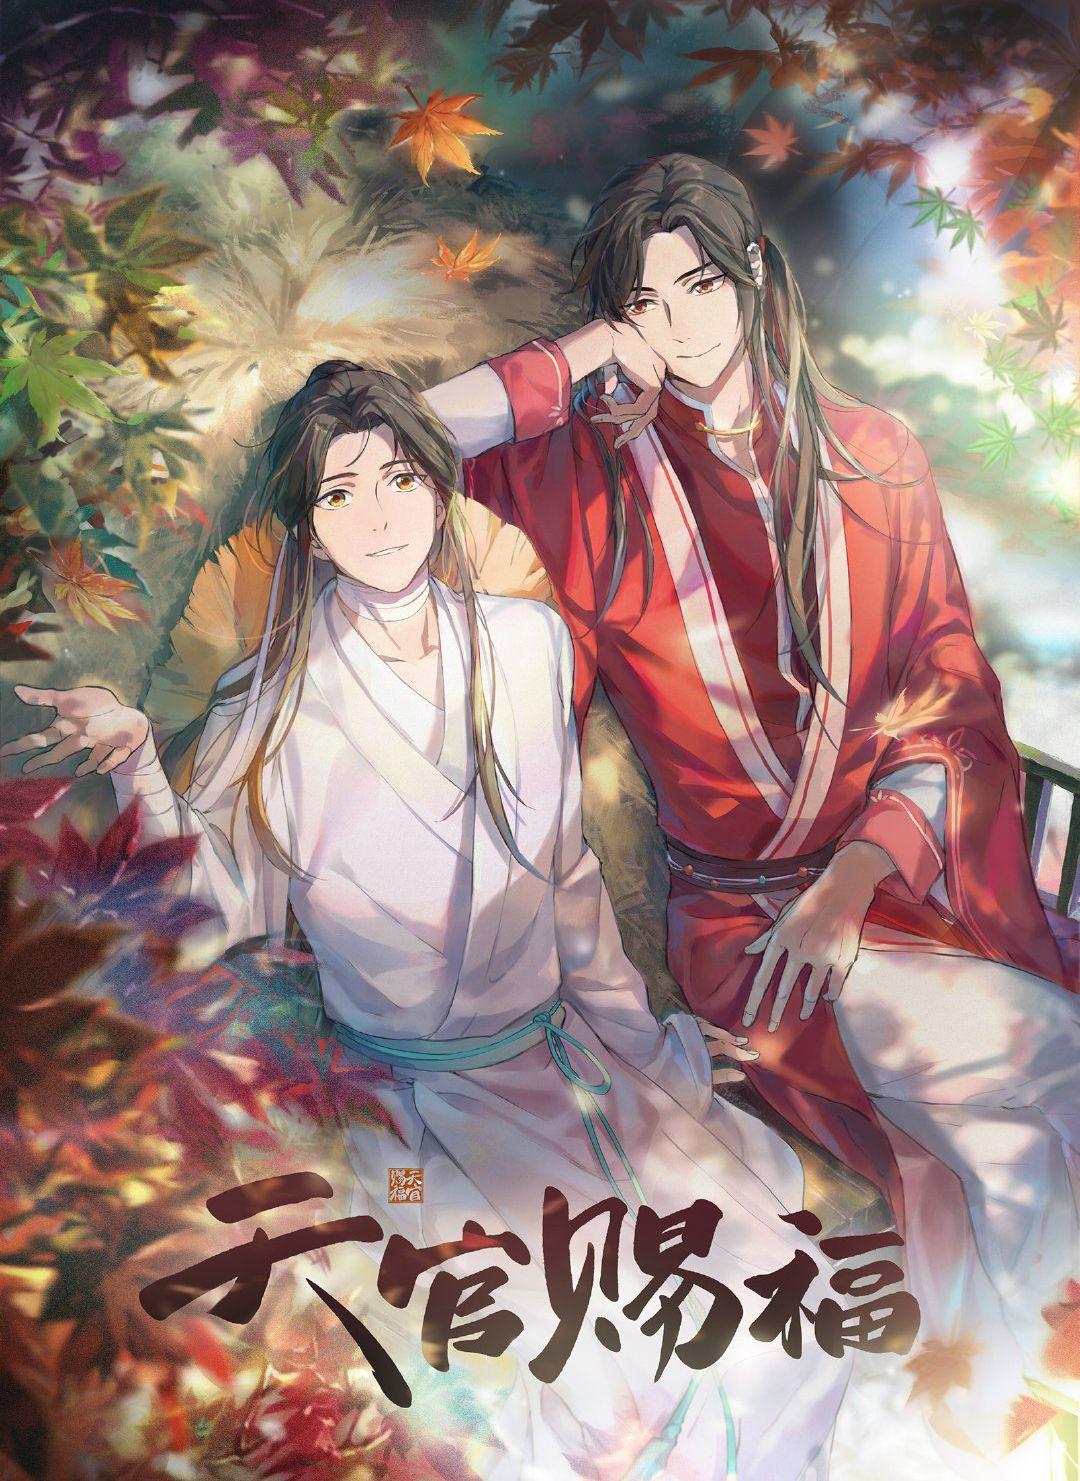 hourly heaven officials blessing on X still obsessed with the pure  perfection that is the tgcf donghua concept art   httpstcokXua6TJLGv  X